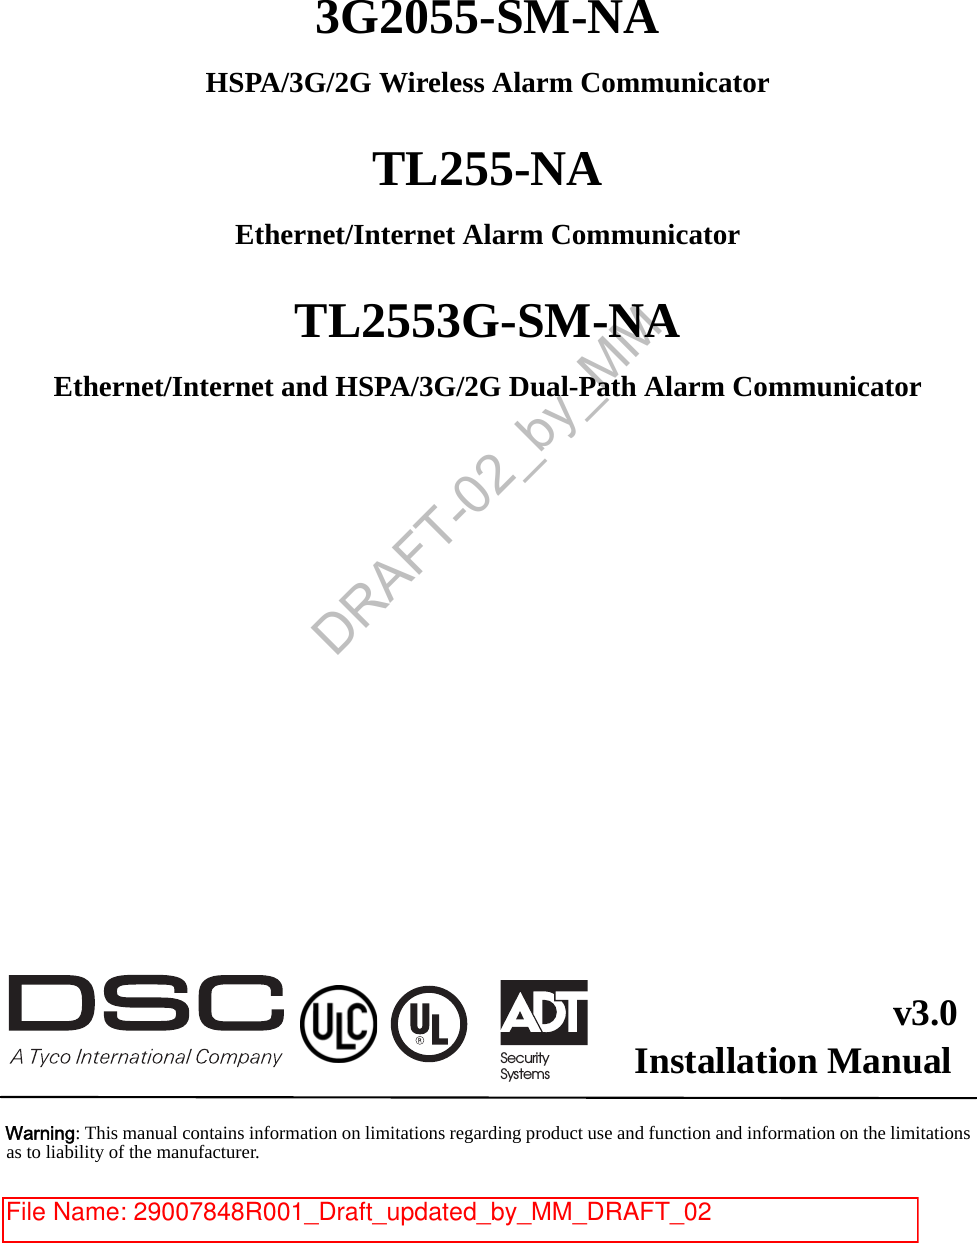 3G2055-SM-NAHSPA/3G/2G Wireless Alarm CommunicatorTL255-NAEthernet/Internet Alarm CommunicatorTL2553G-SM-NAEthernet/Internet and HSPA/3G/2G Dual-Path Alarm Communicatorv3.0Installation ManualWarning: This manual contains information on limitations regarding product use and function and information on the limitations as to liability of the manufacturer.SecuritySystems®DRAFT-02_by_MMFile Name: 29007848R001_Draft_updated_by_MM_DRAFT_02